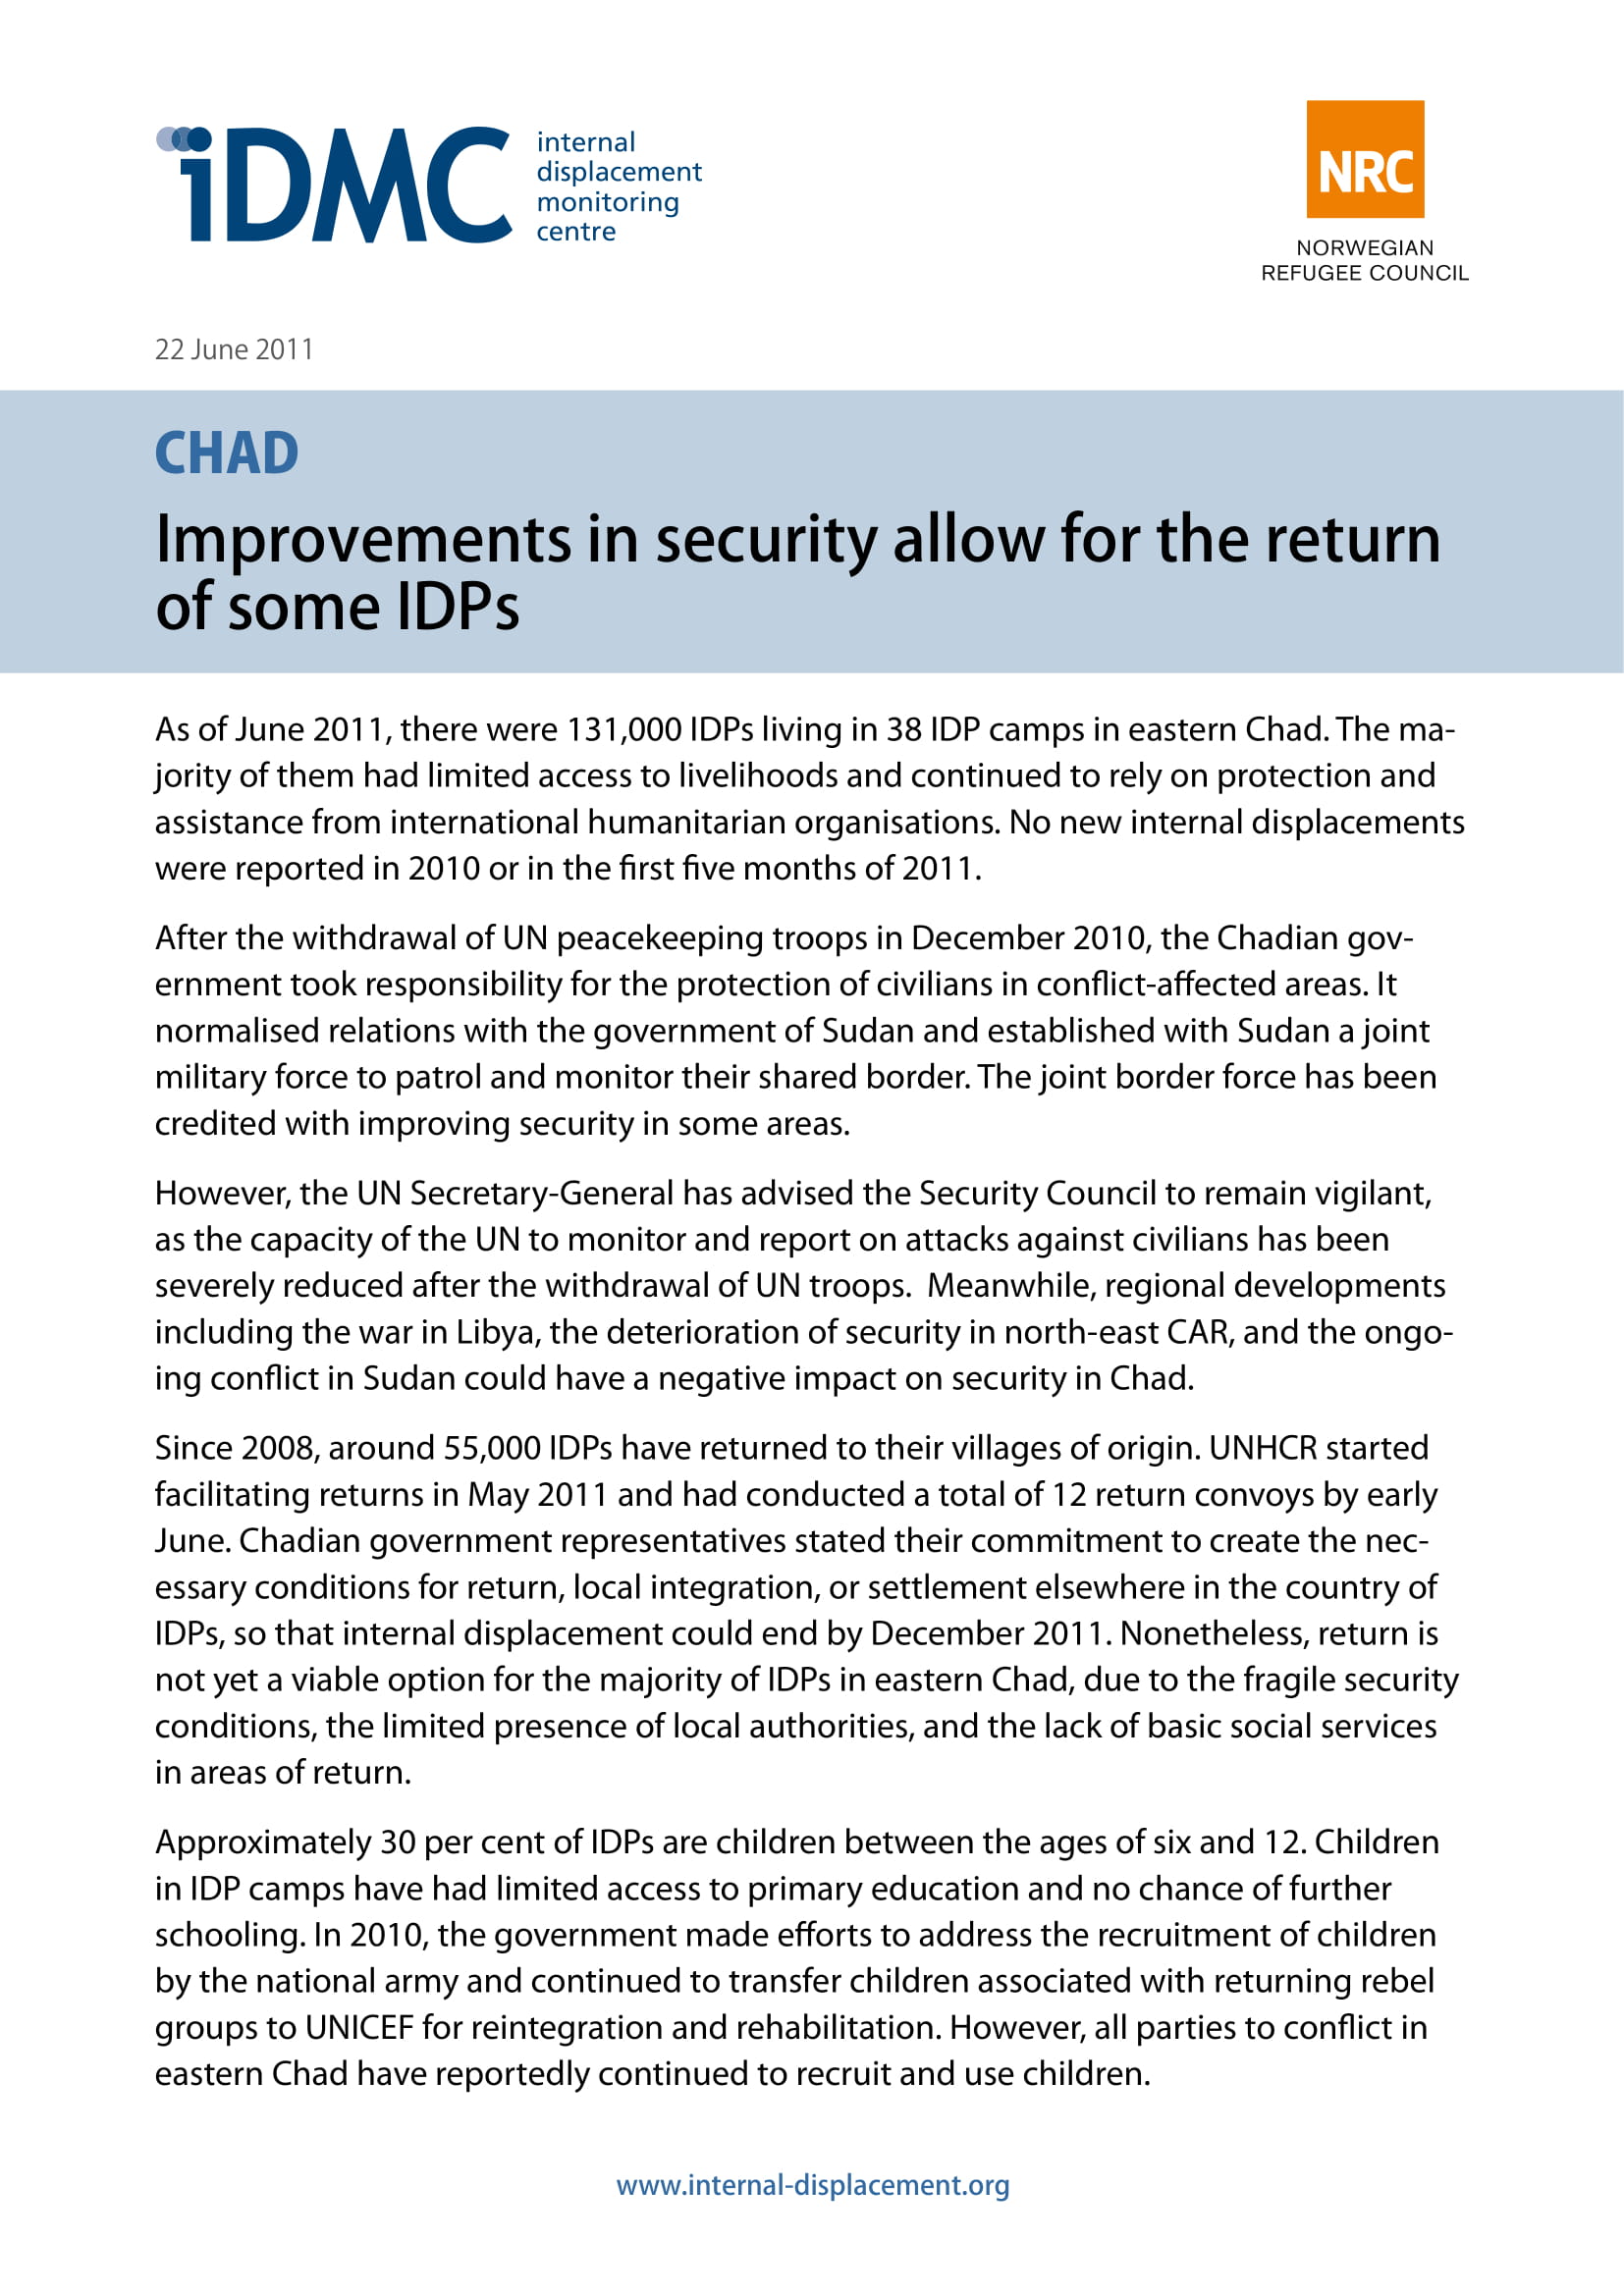 Chad: Improvements in security allow for the return of some IDPs